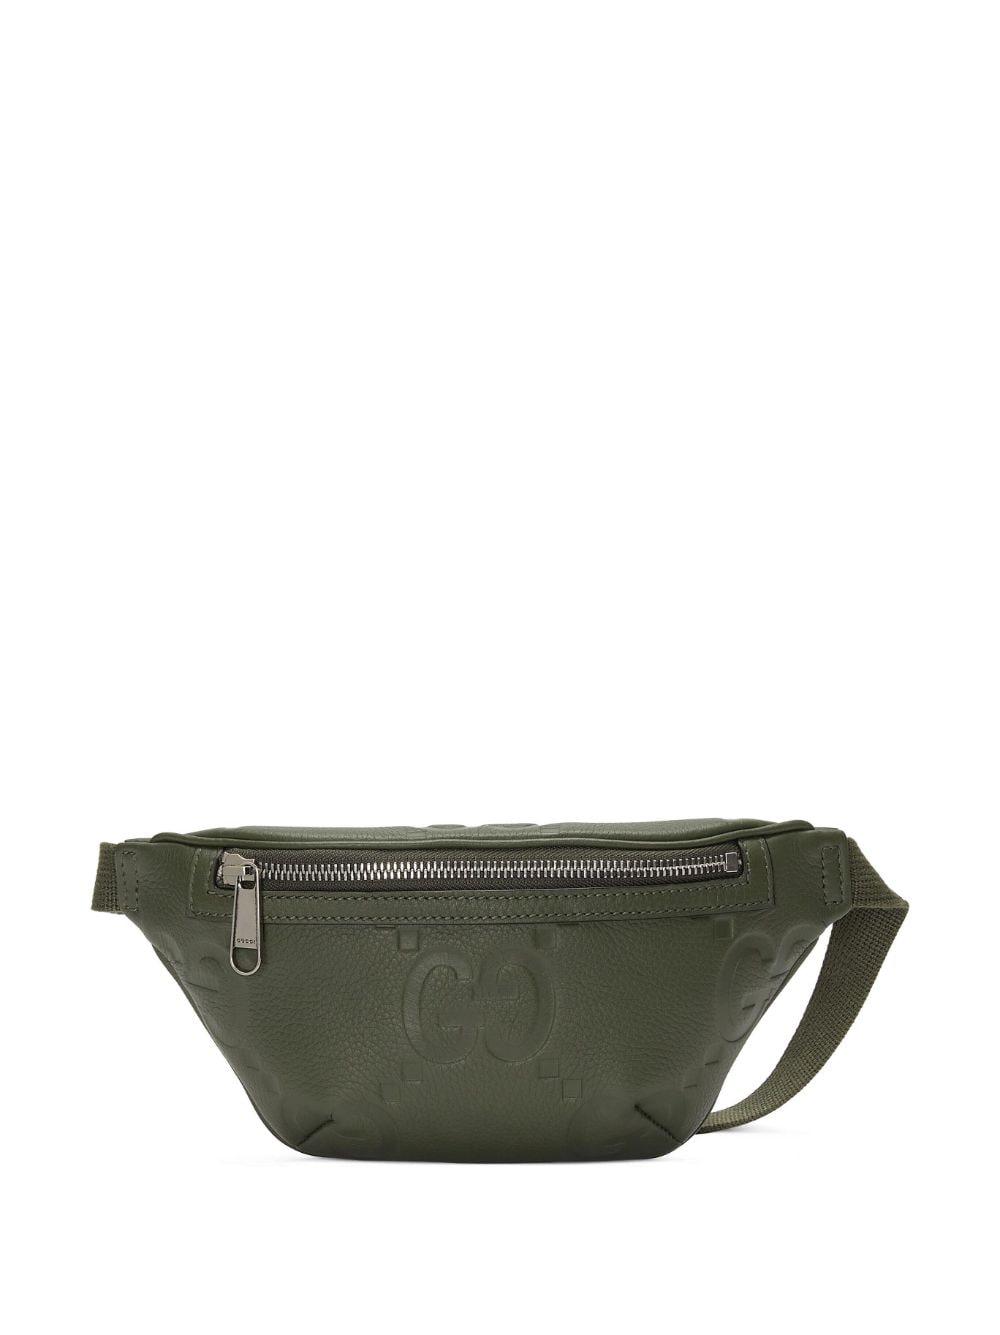 Gucci Leather GG Belt Bag in Green for Men